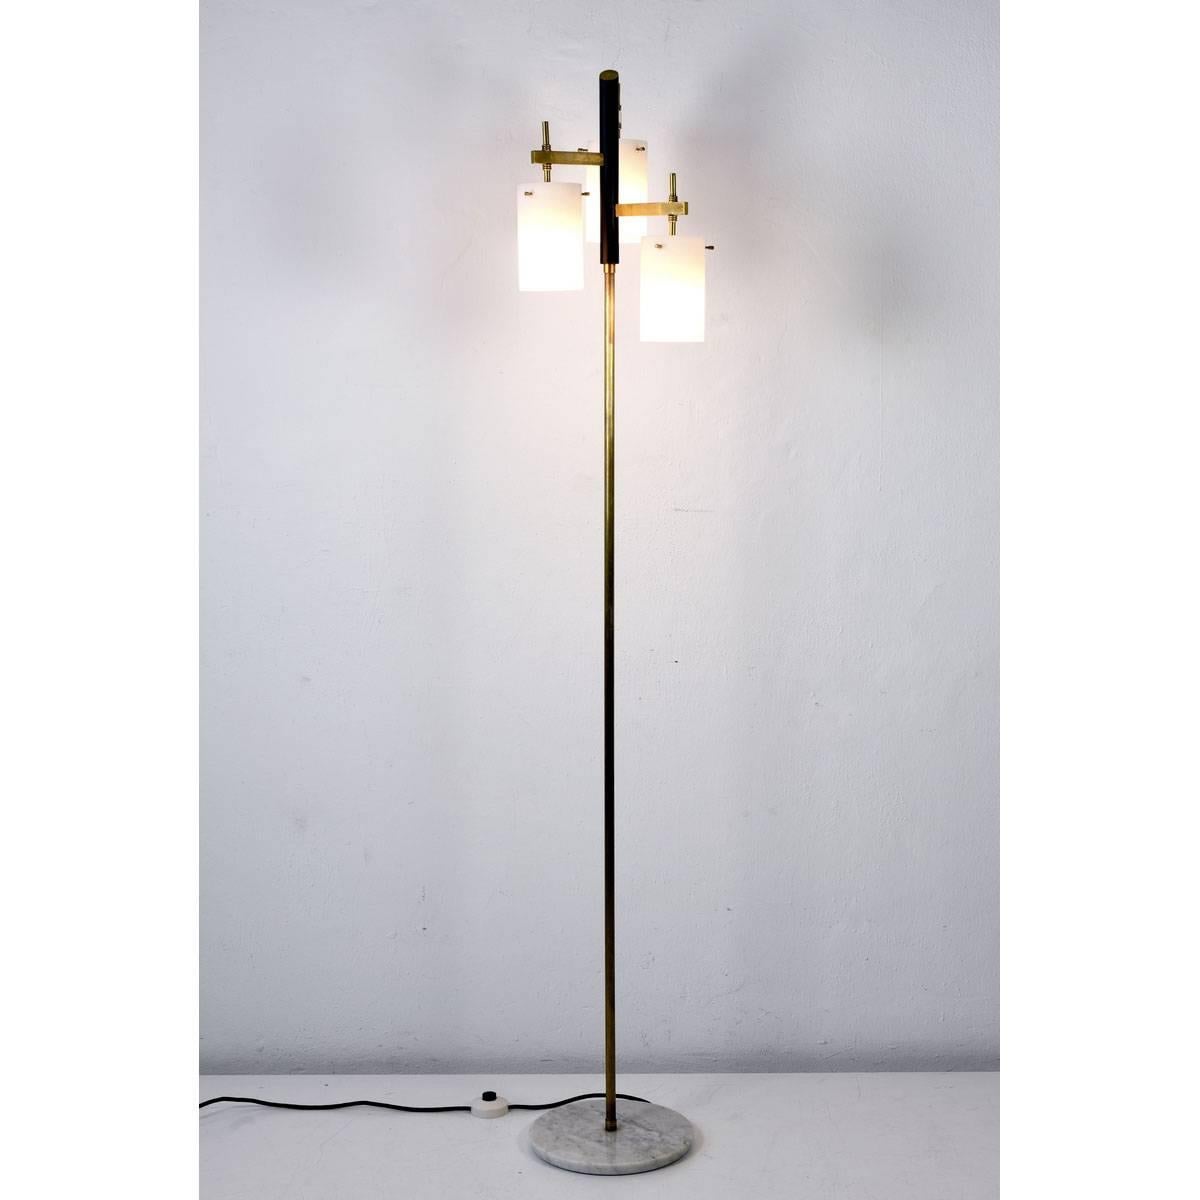 An elegant floor lamp from the Italy of the 1950s. The white-covered glass reflectors produce a fine and even light effect. The maker is most likely Stilnovo, Milano.
 